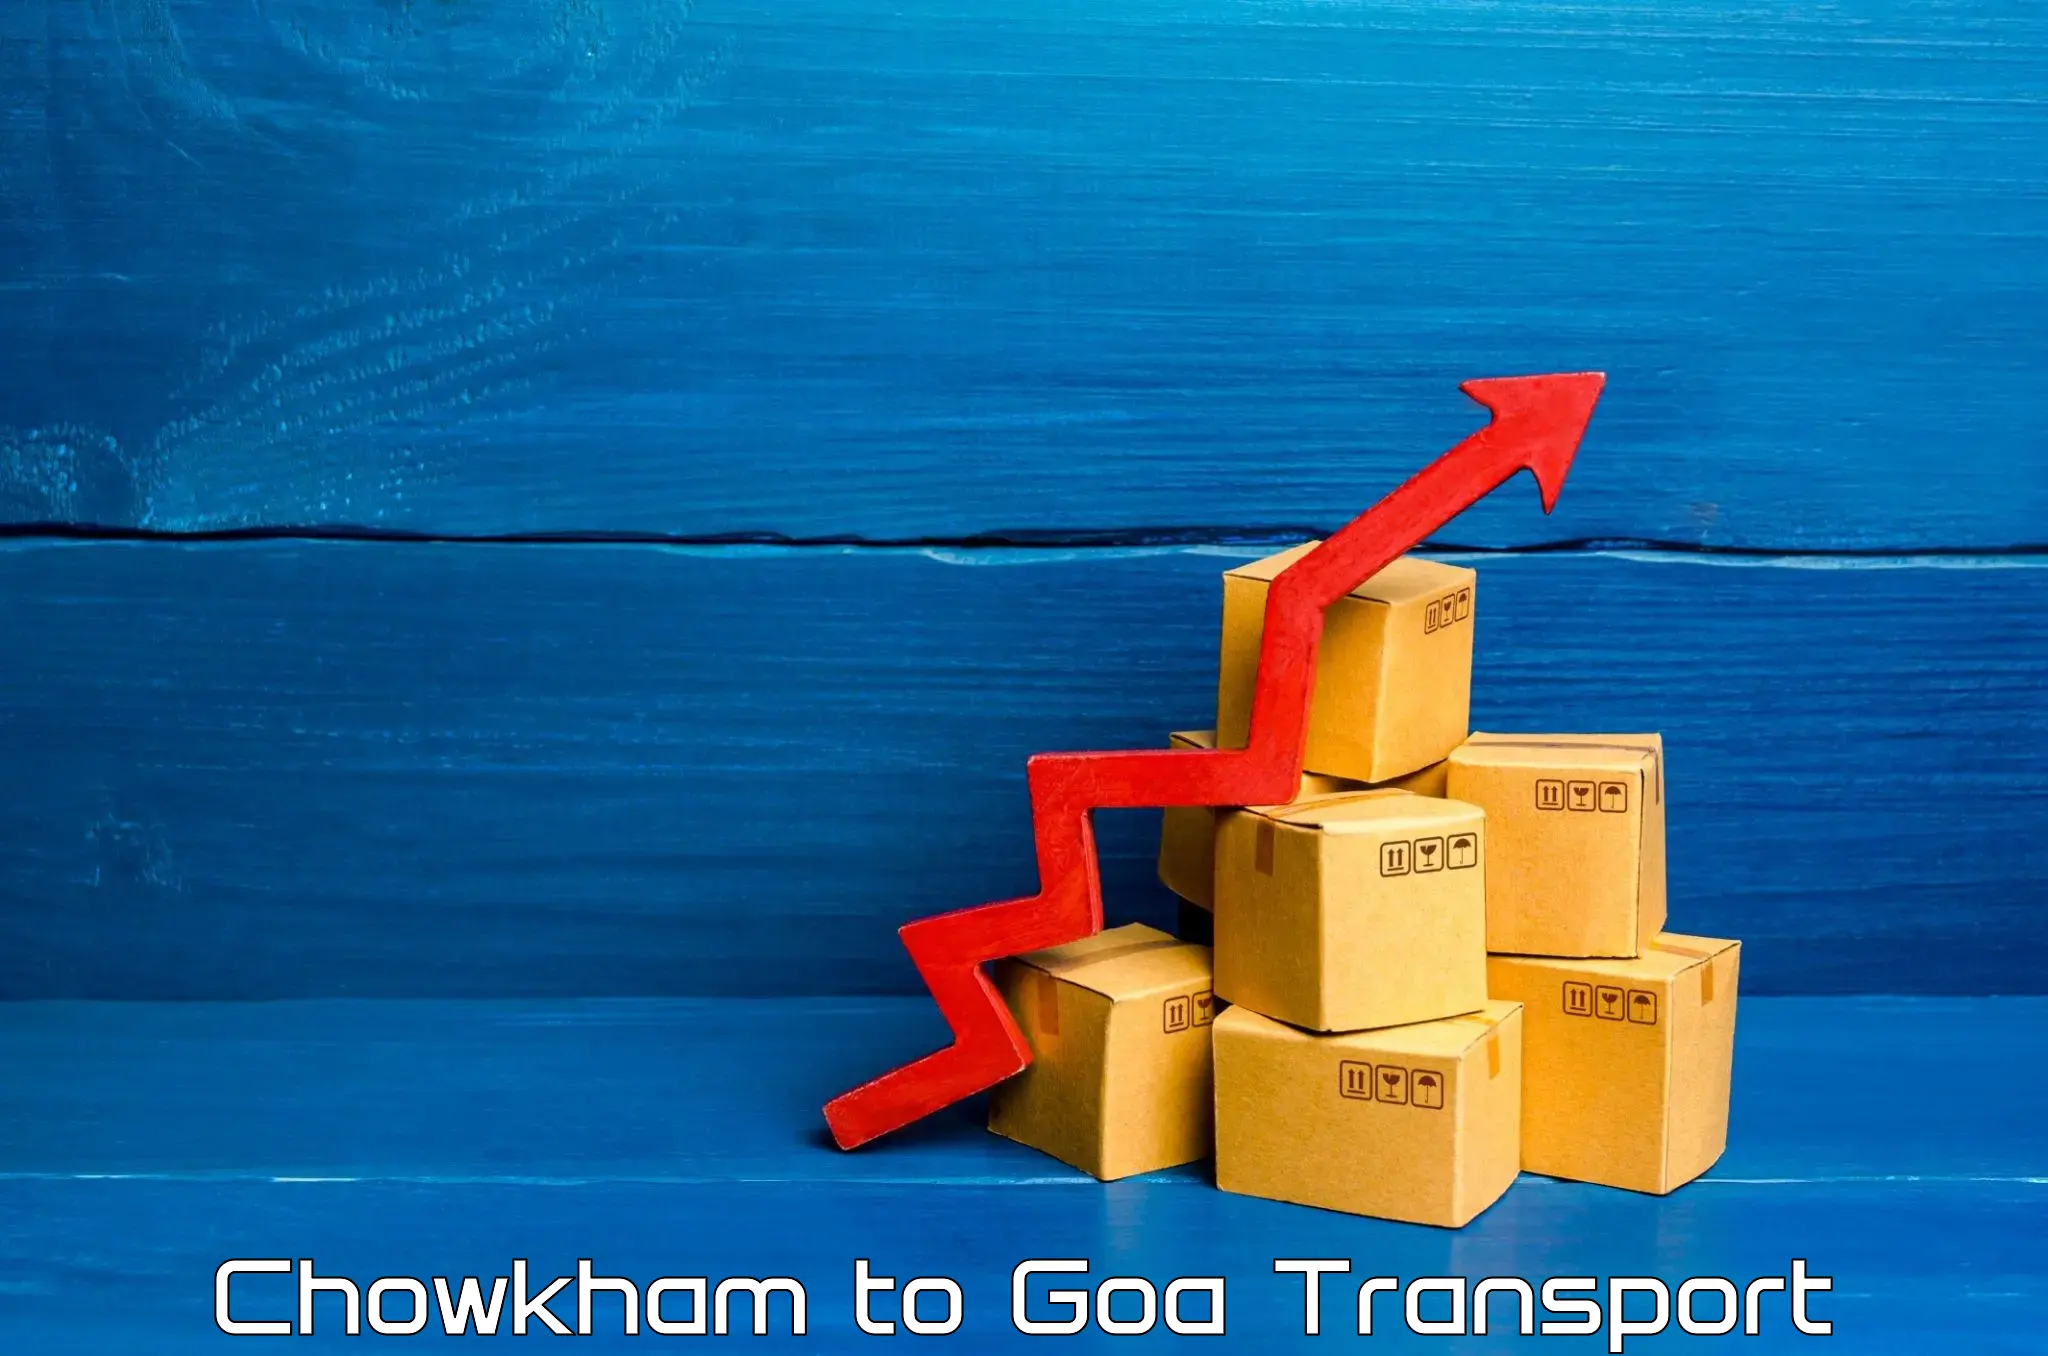 Transport bike from one state to another Chowkham to Goa University